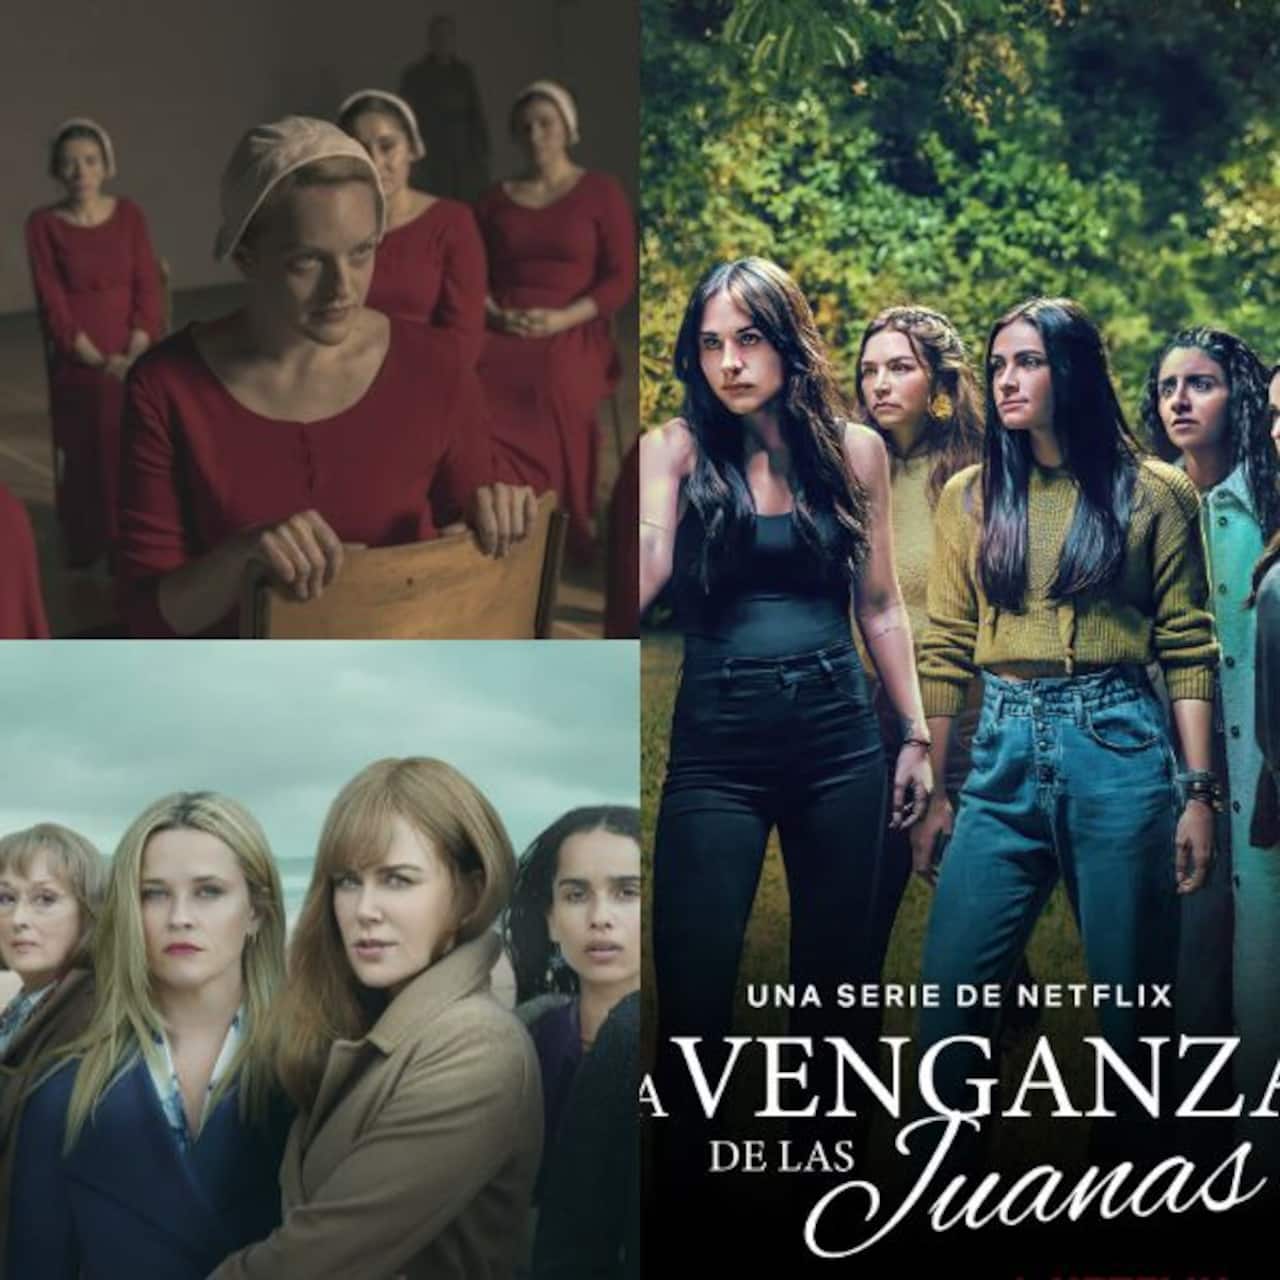 #BLRecommends: Loving The Five Juanas? – check out The Handmaid's Tale, Big Little Lies, Churails and more web series where women get together to kick a**